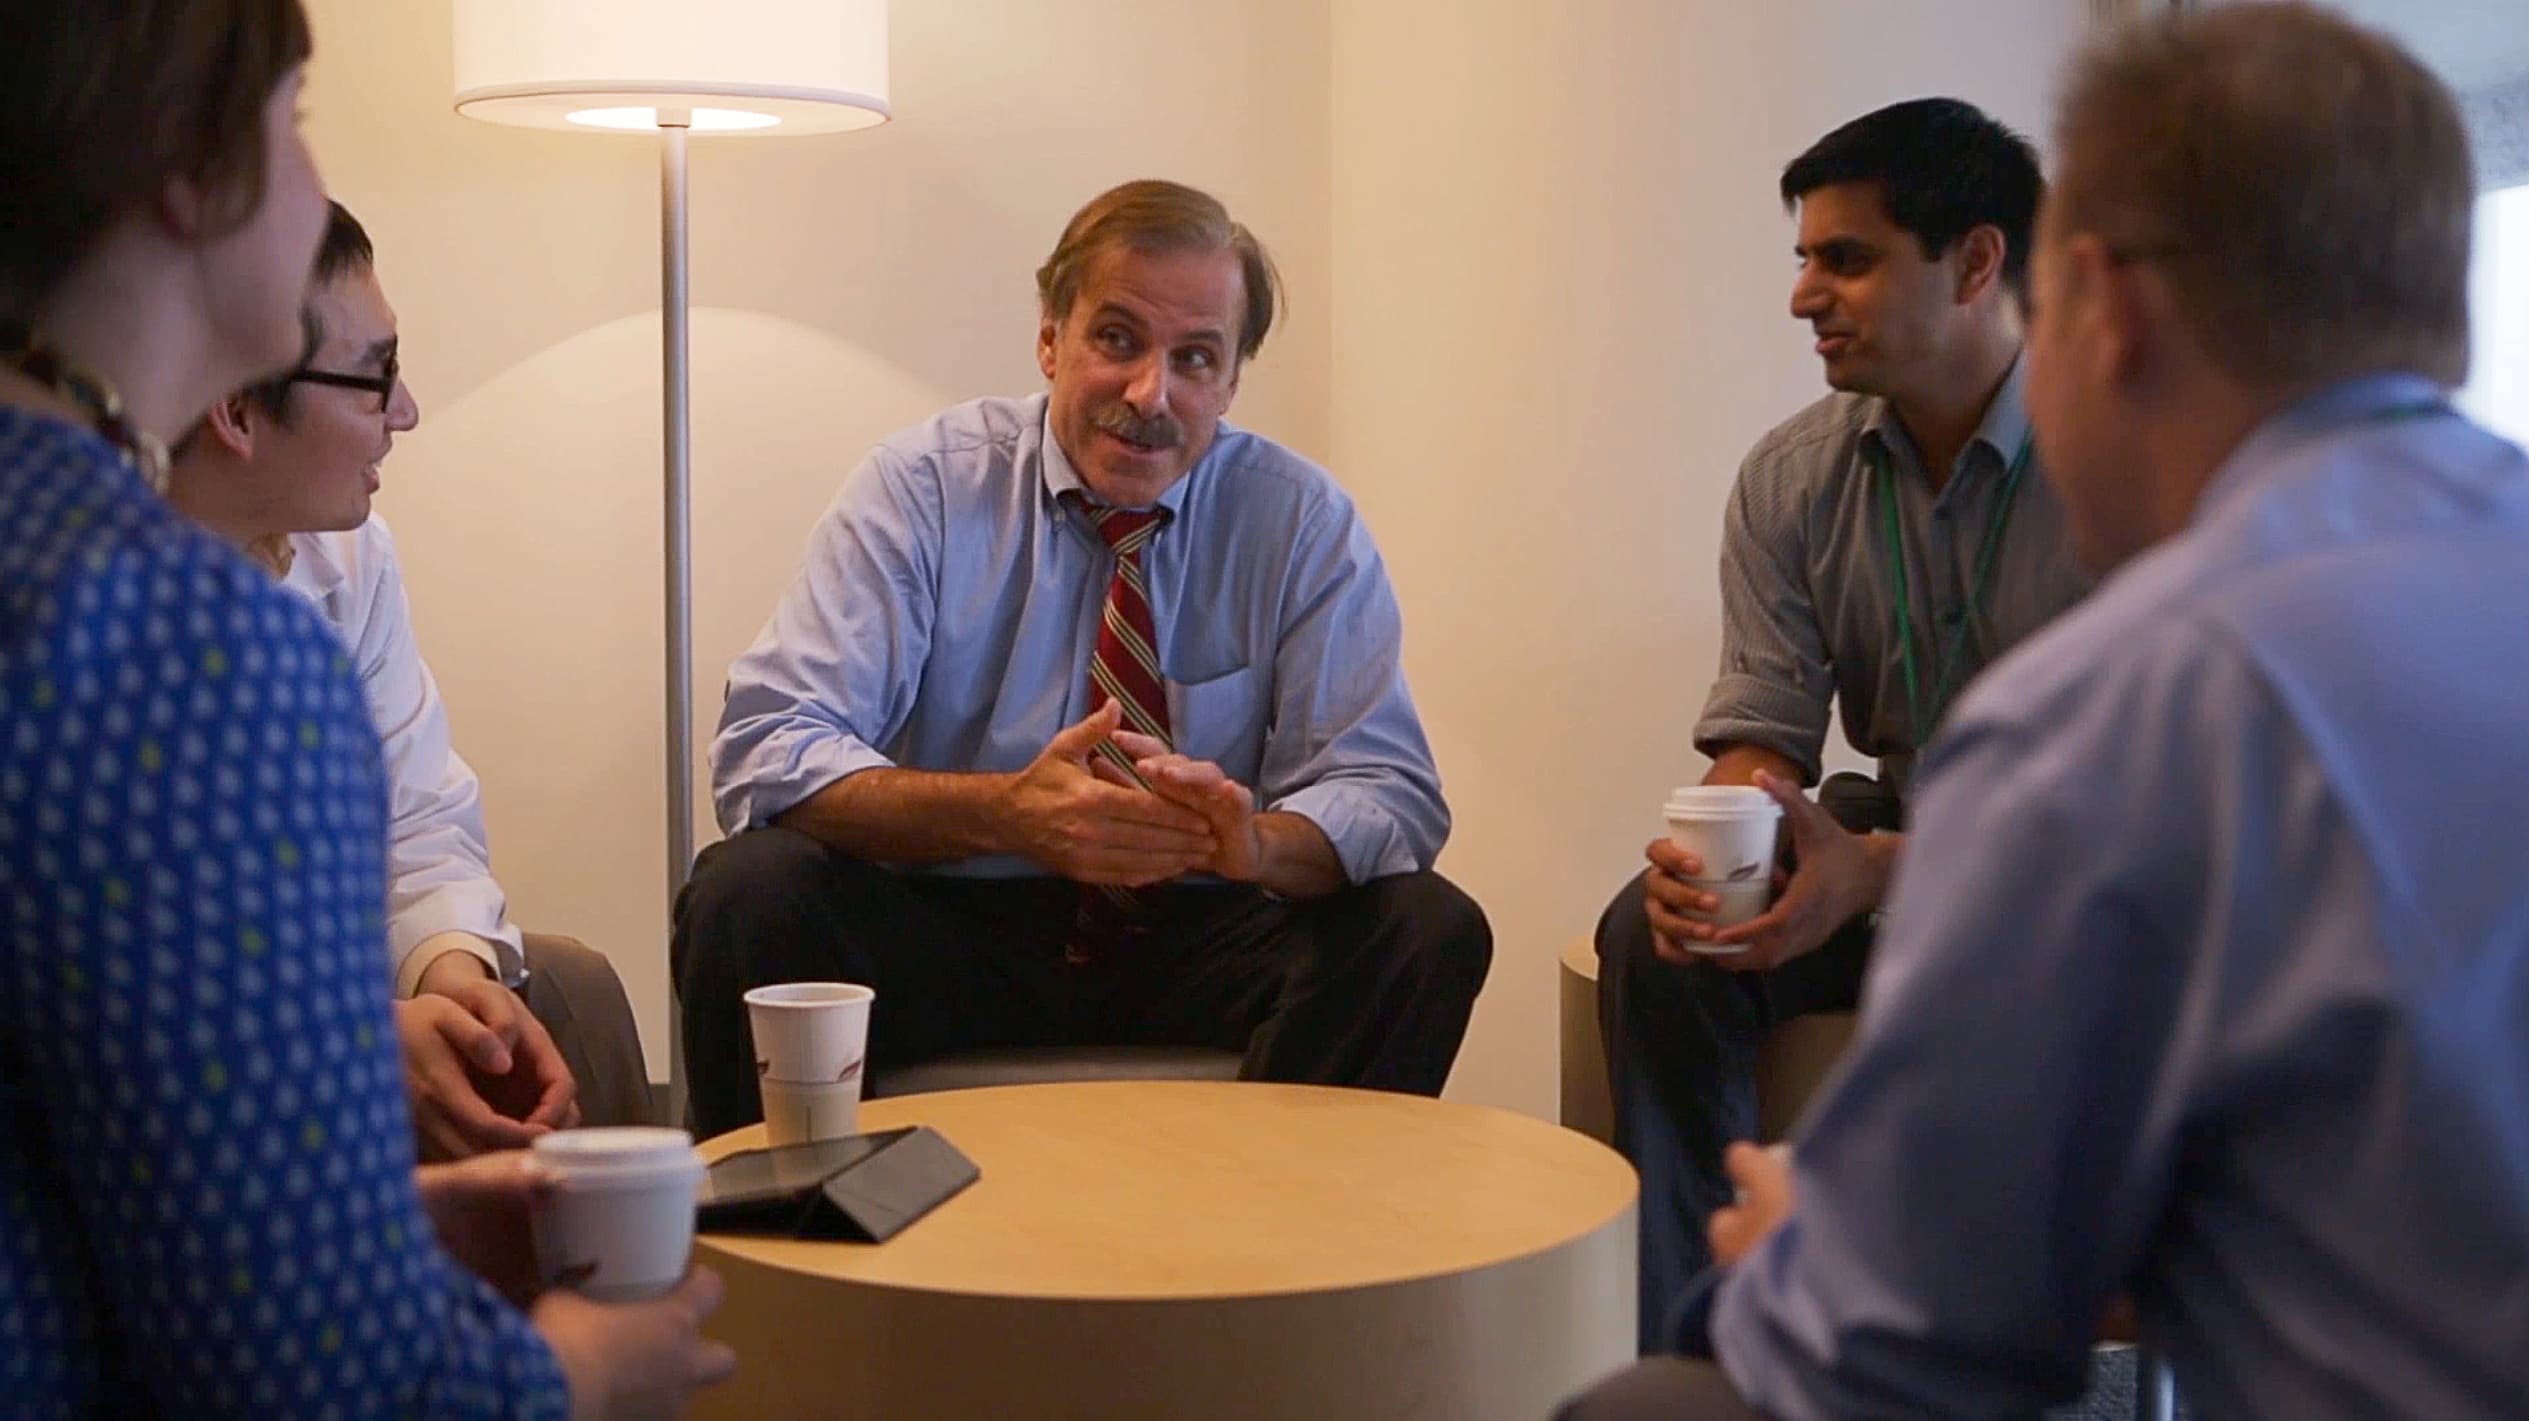 Mark Pollack, MD, has a conversation with residents around a table as they drink coffee.